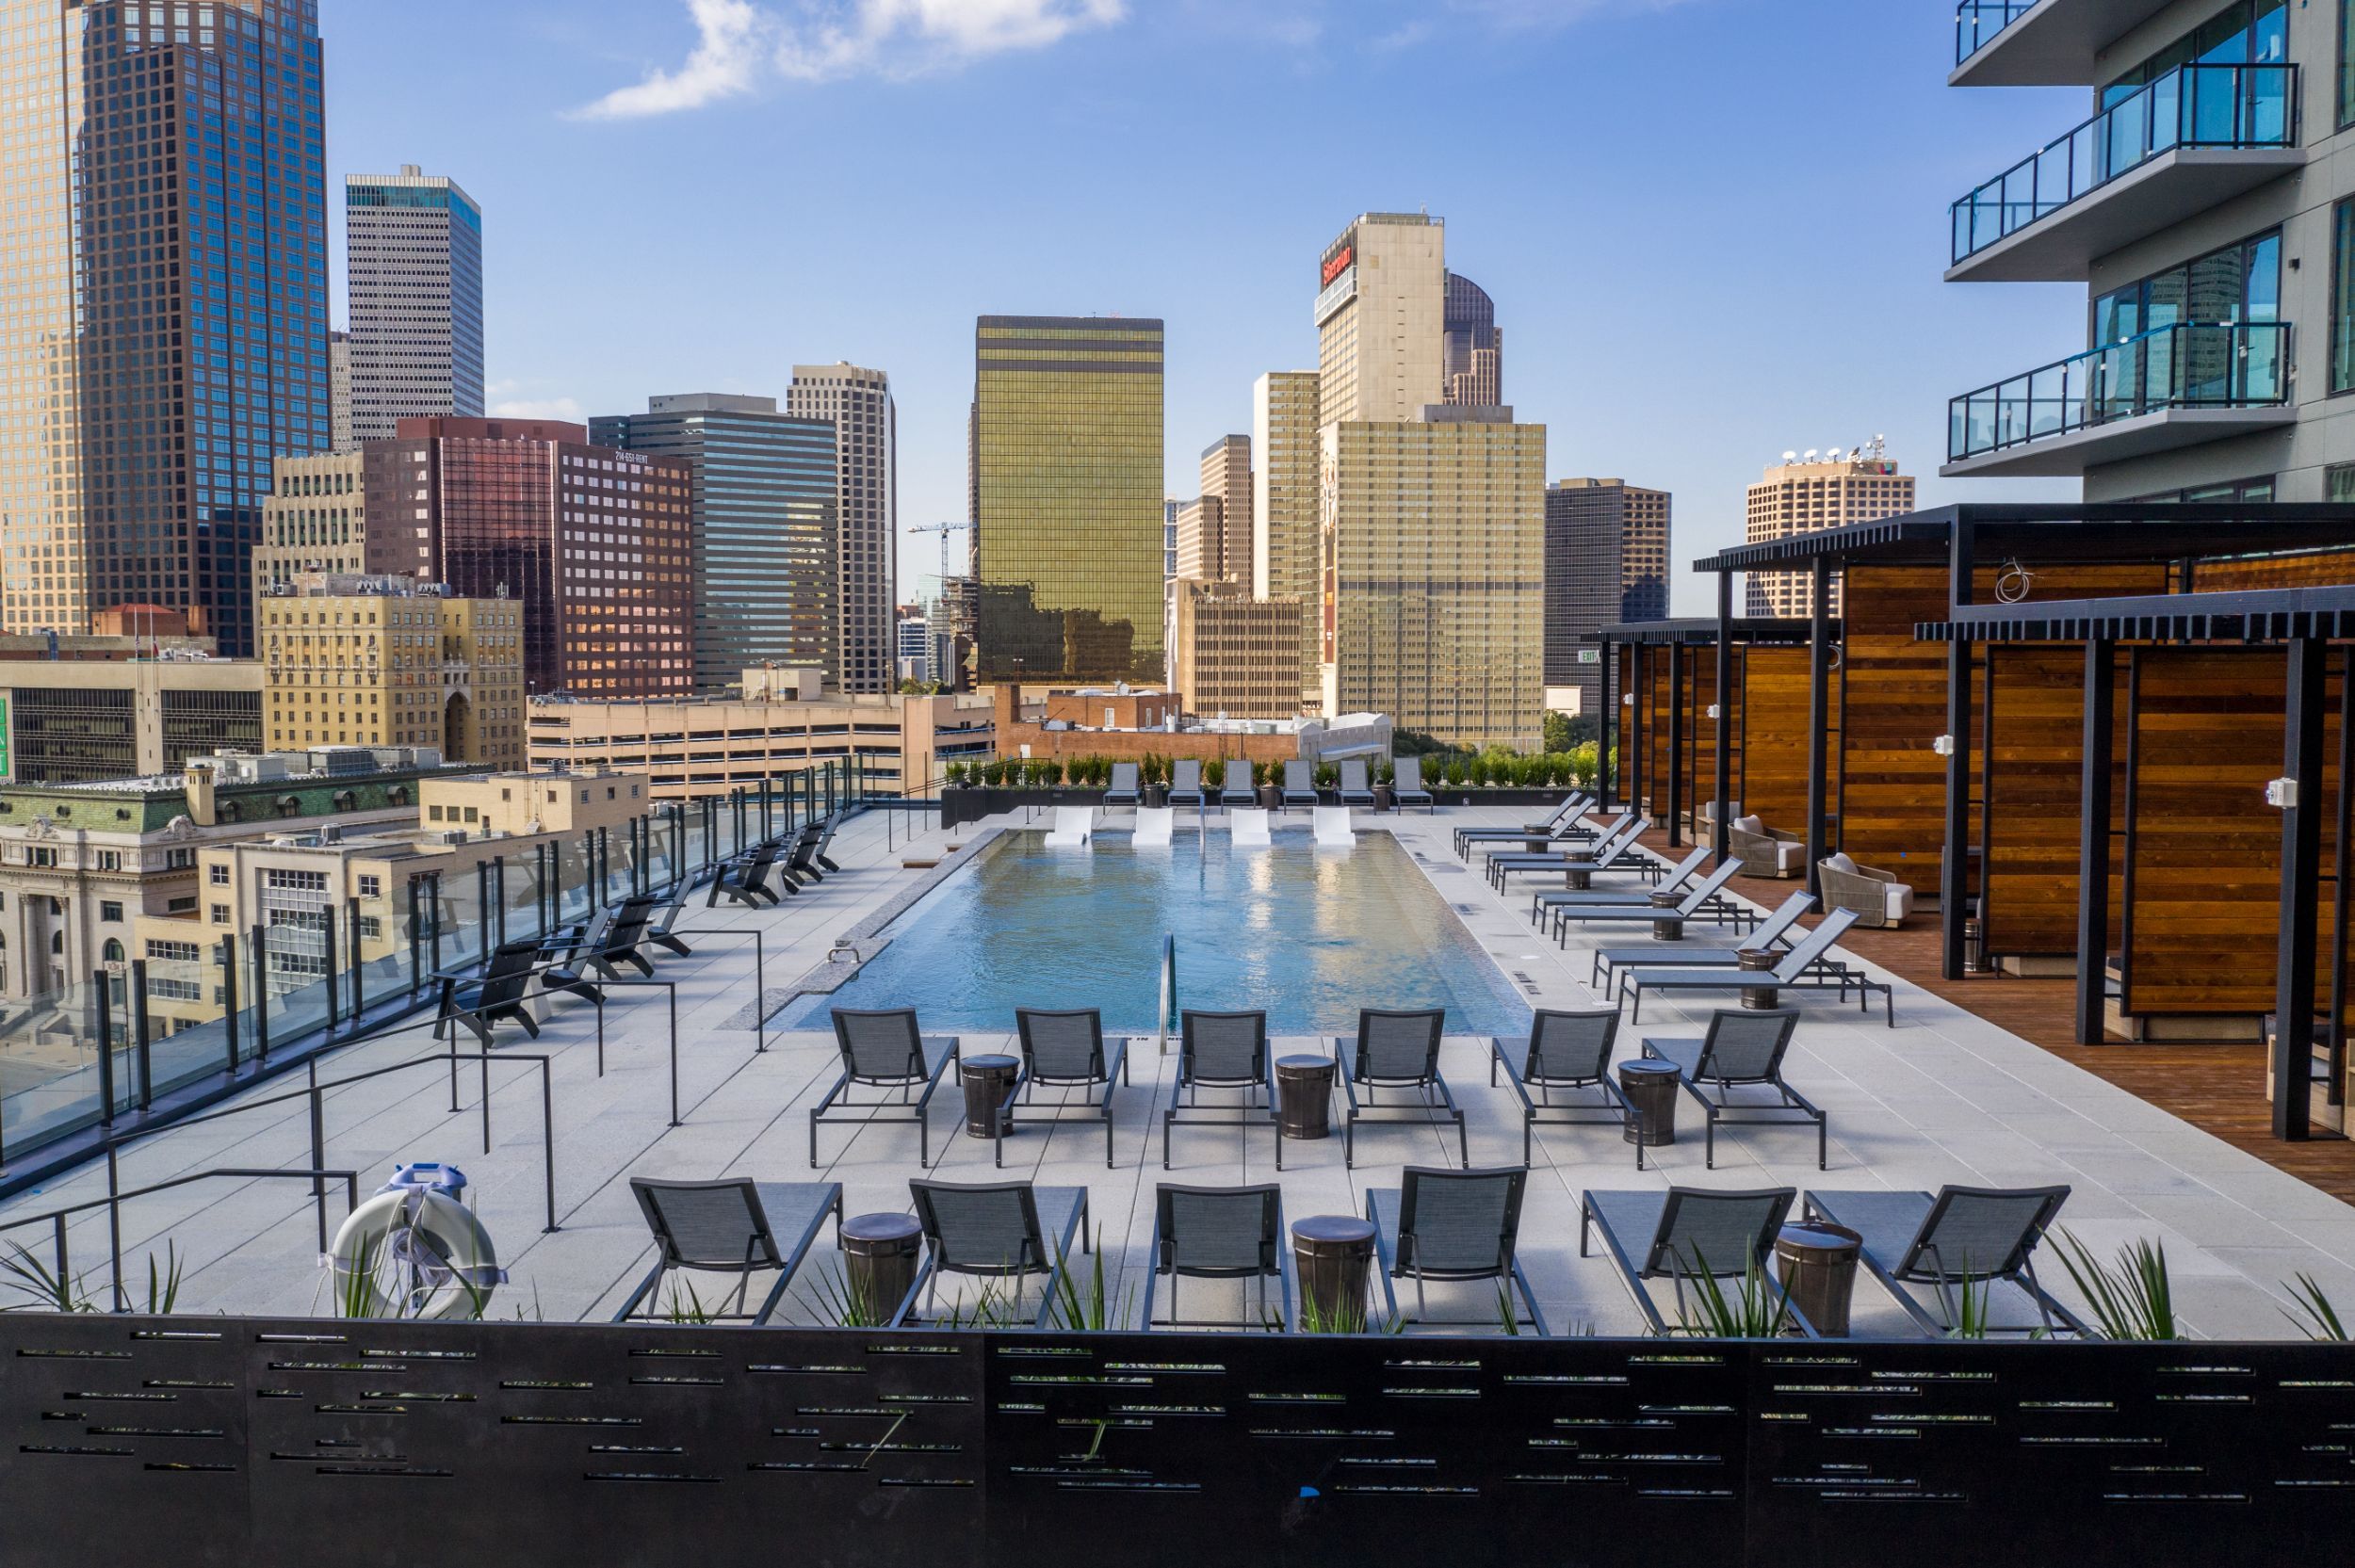 New East Quarter downtown Dallas apartments with a rooftop pool offering lounge chairs and a stunning view of the city.